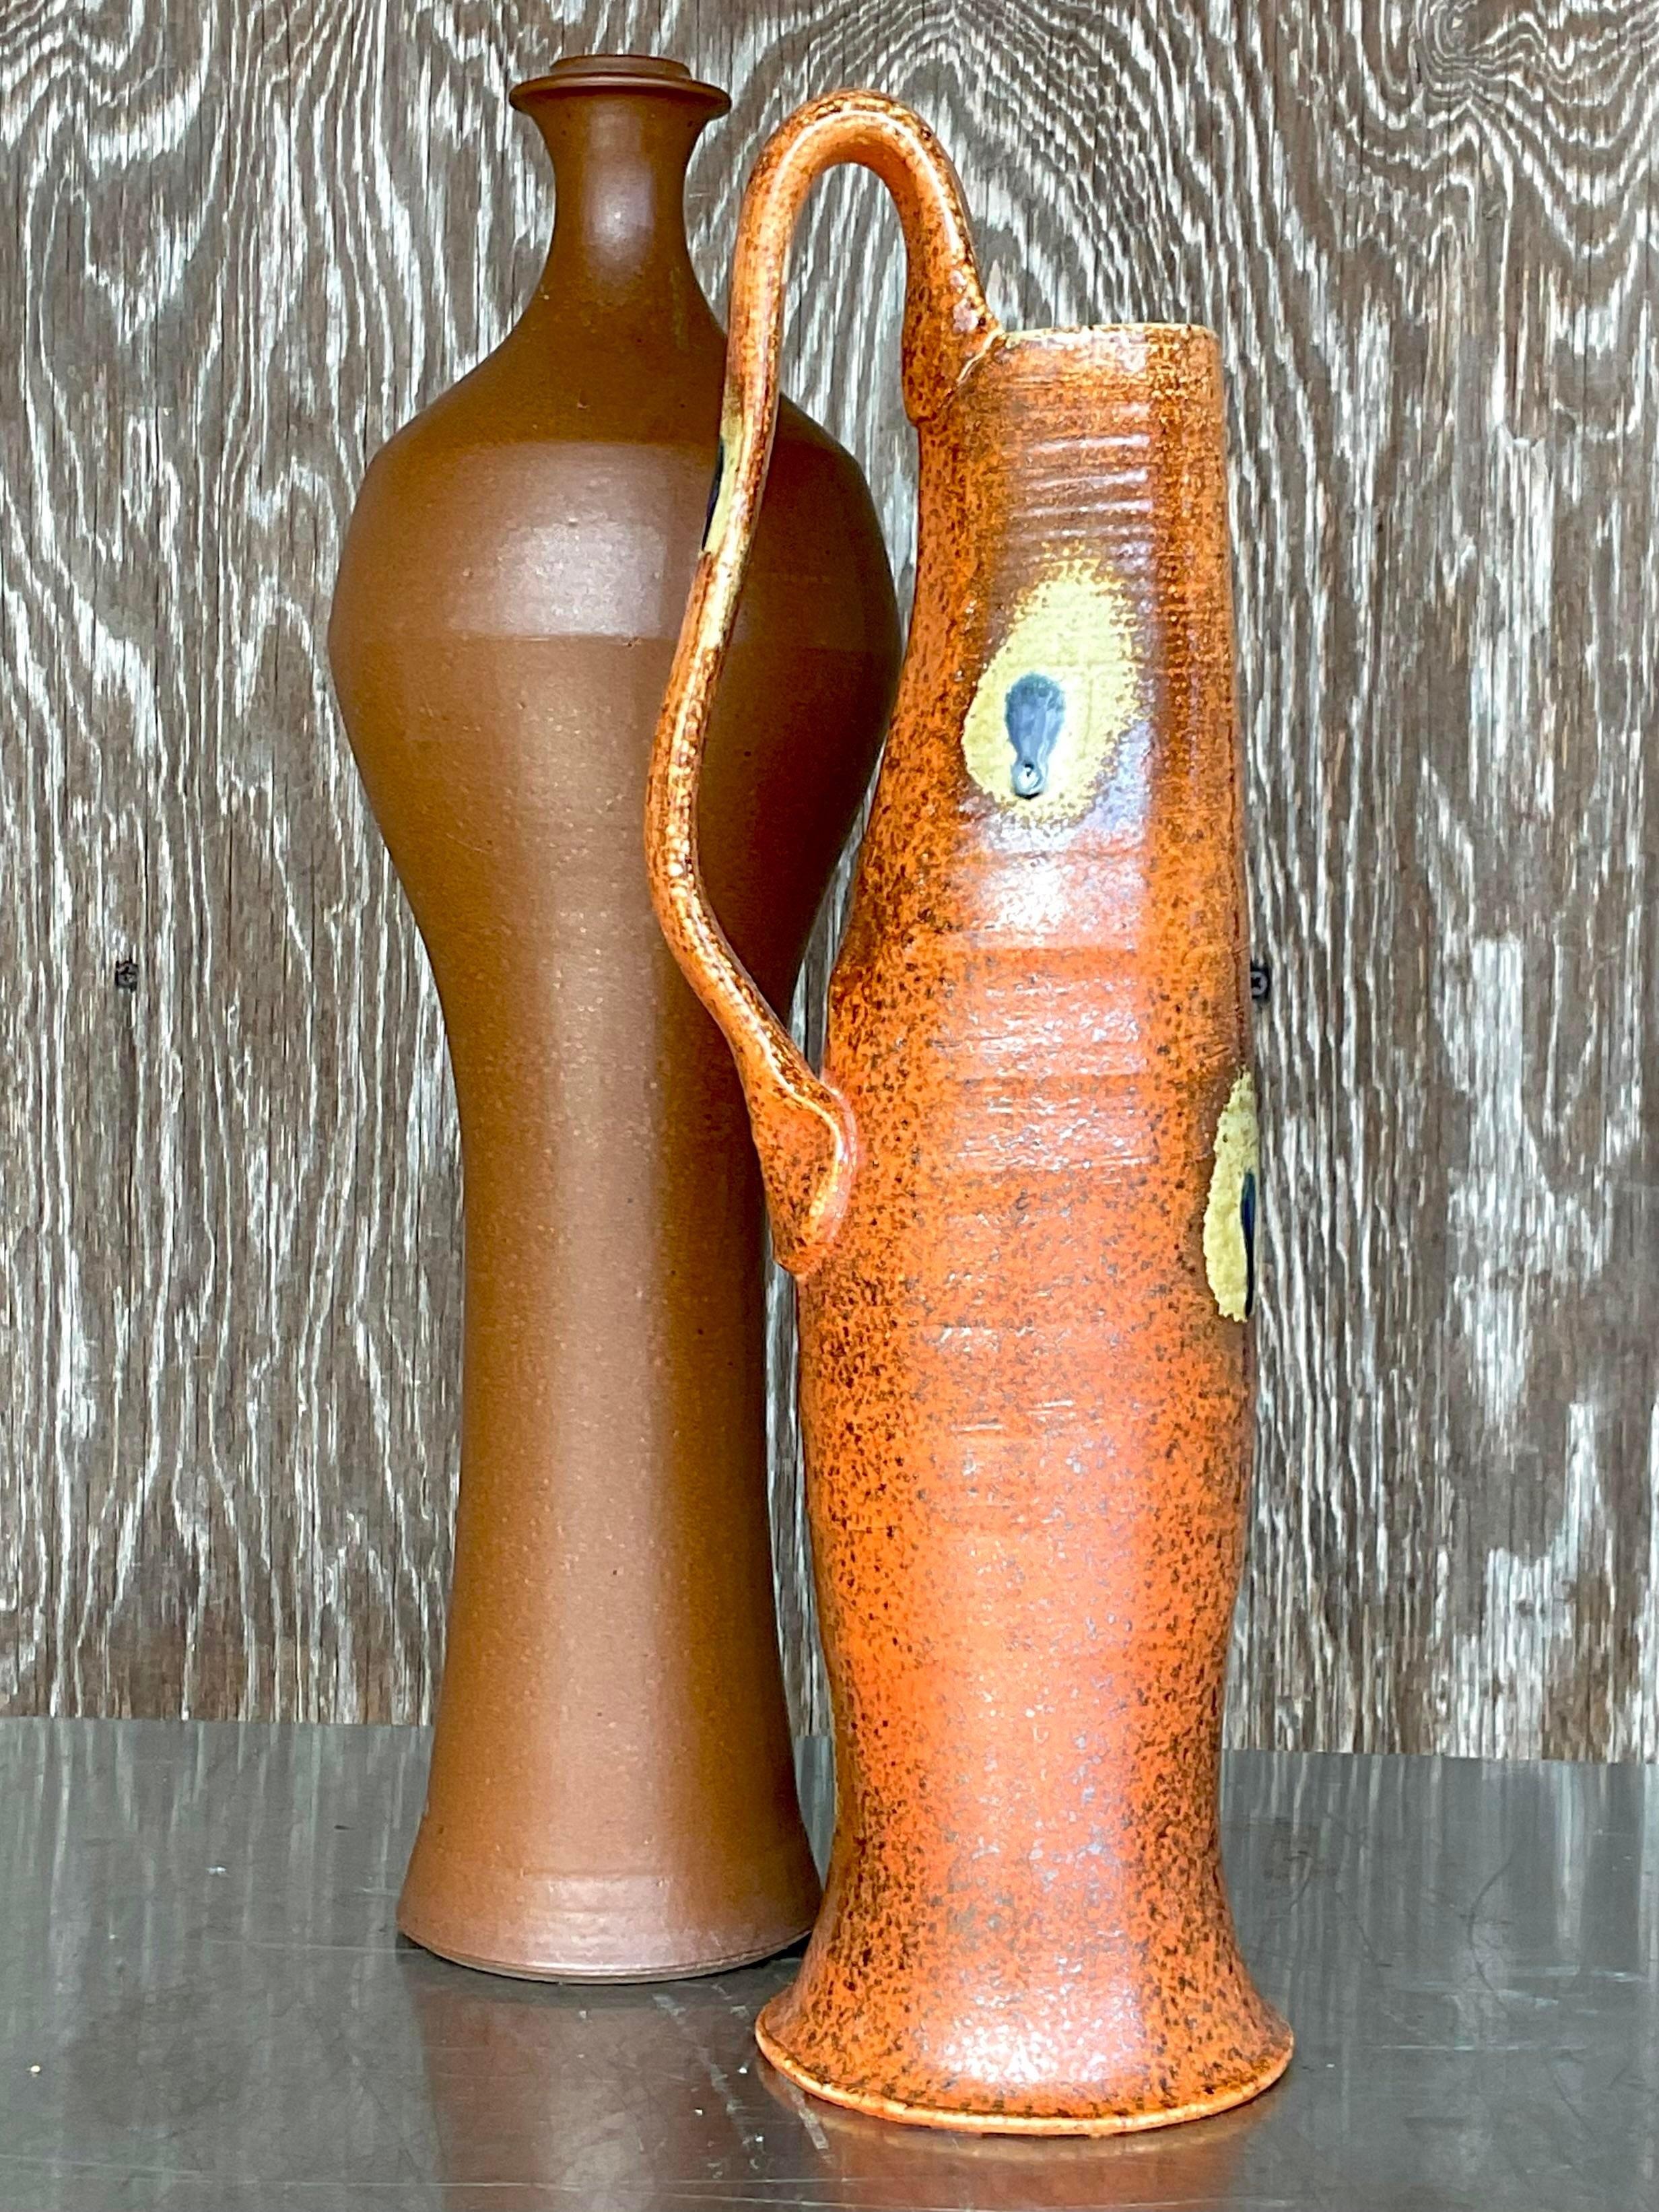 A fantastic set of two vintage vases. Each hand made studio pottery designs and each signed by the artists. Incredible attention to detail and gorgeous glazed finishes. Tall and impressive.

Small vase 6x5x18